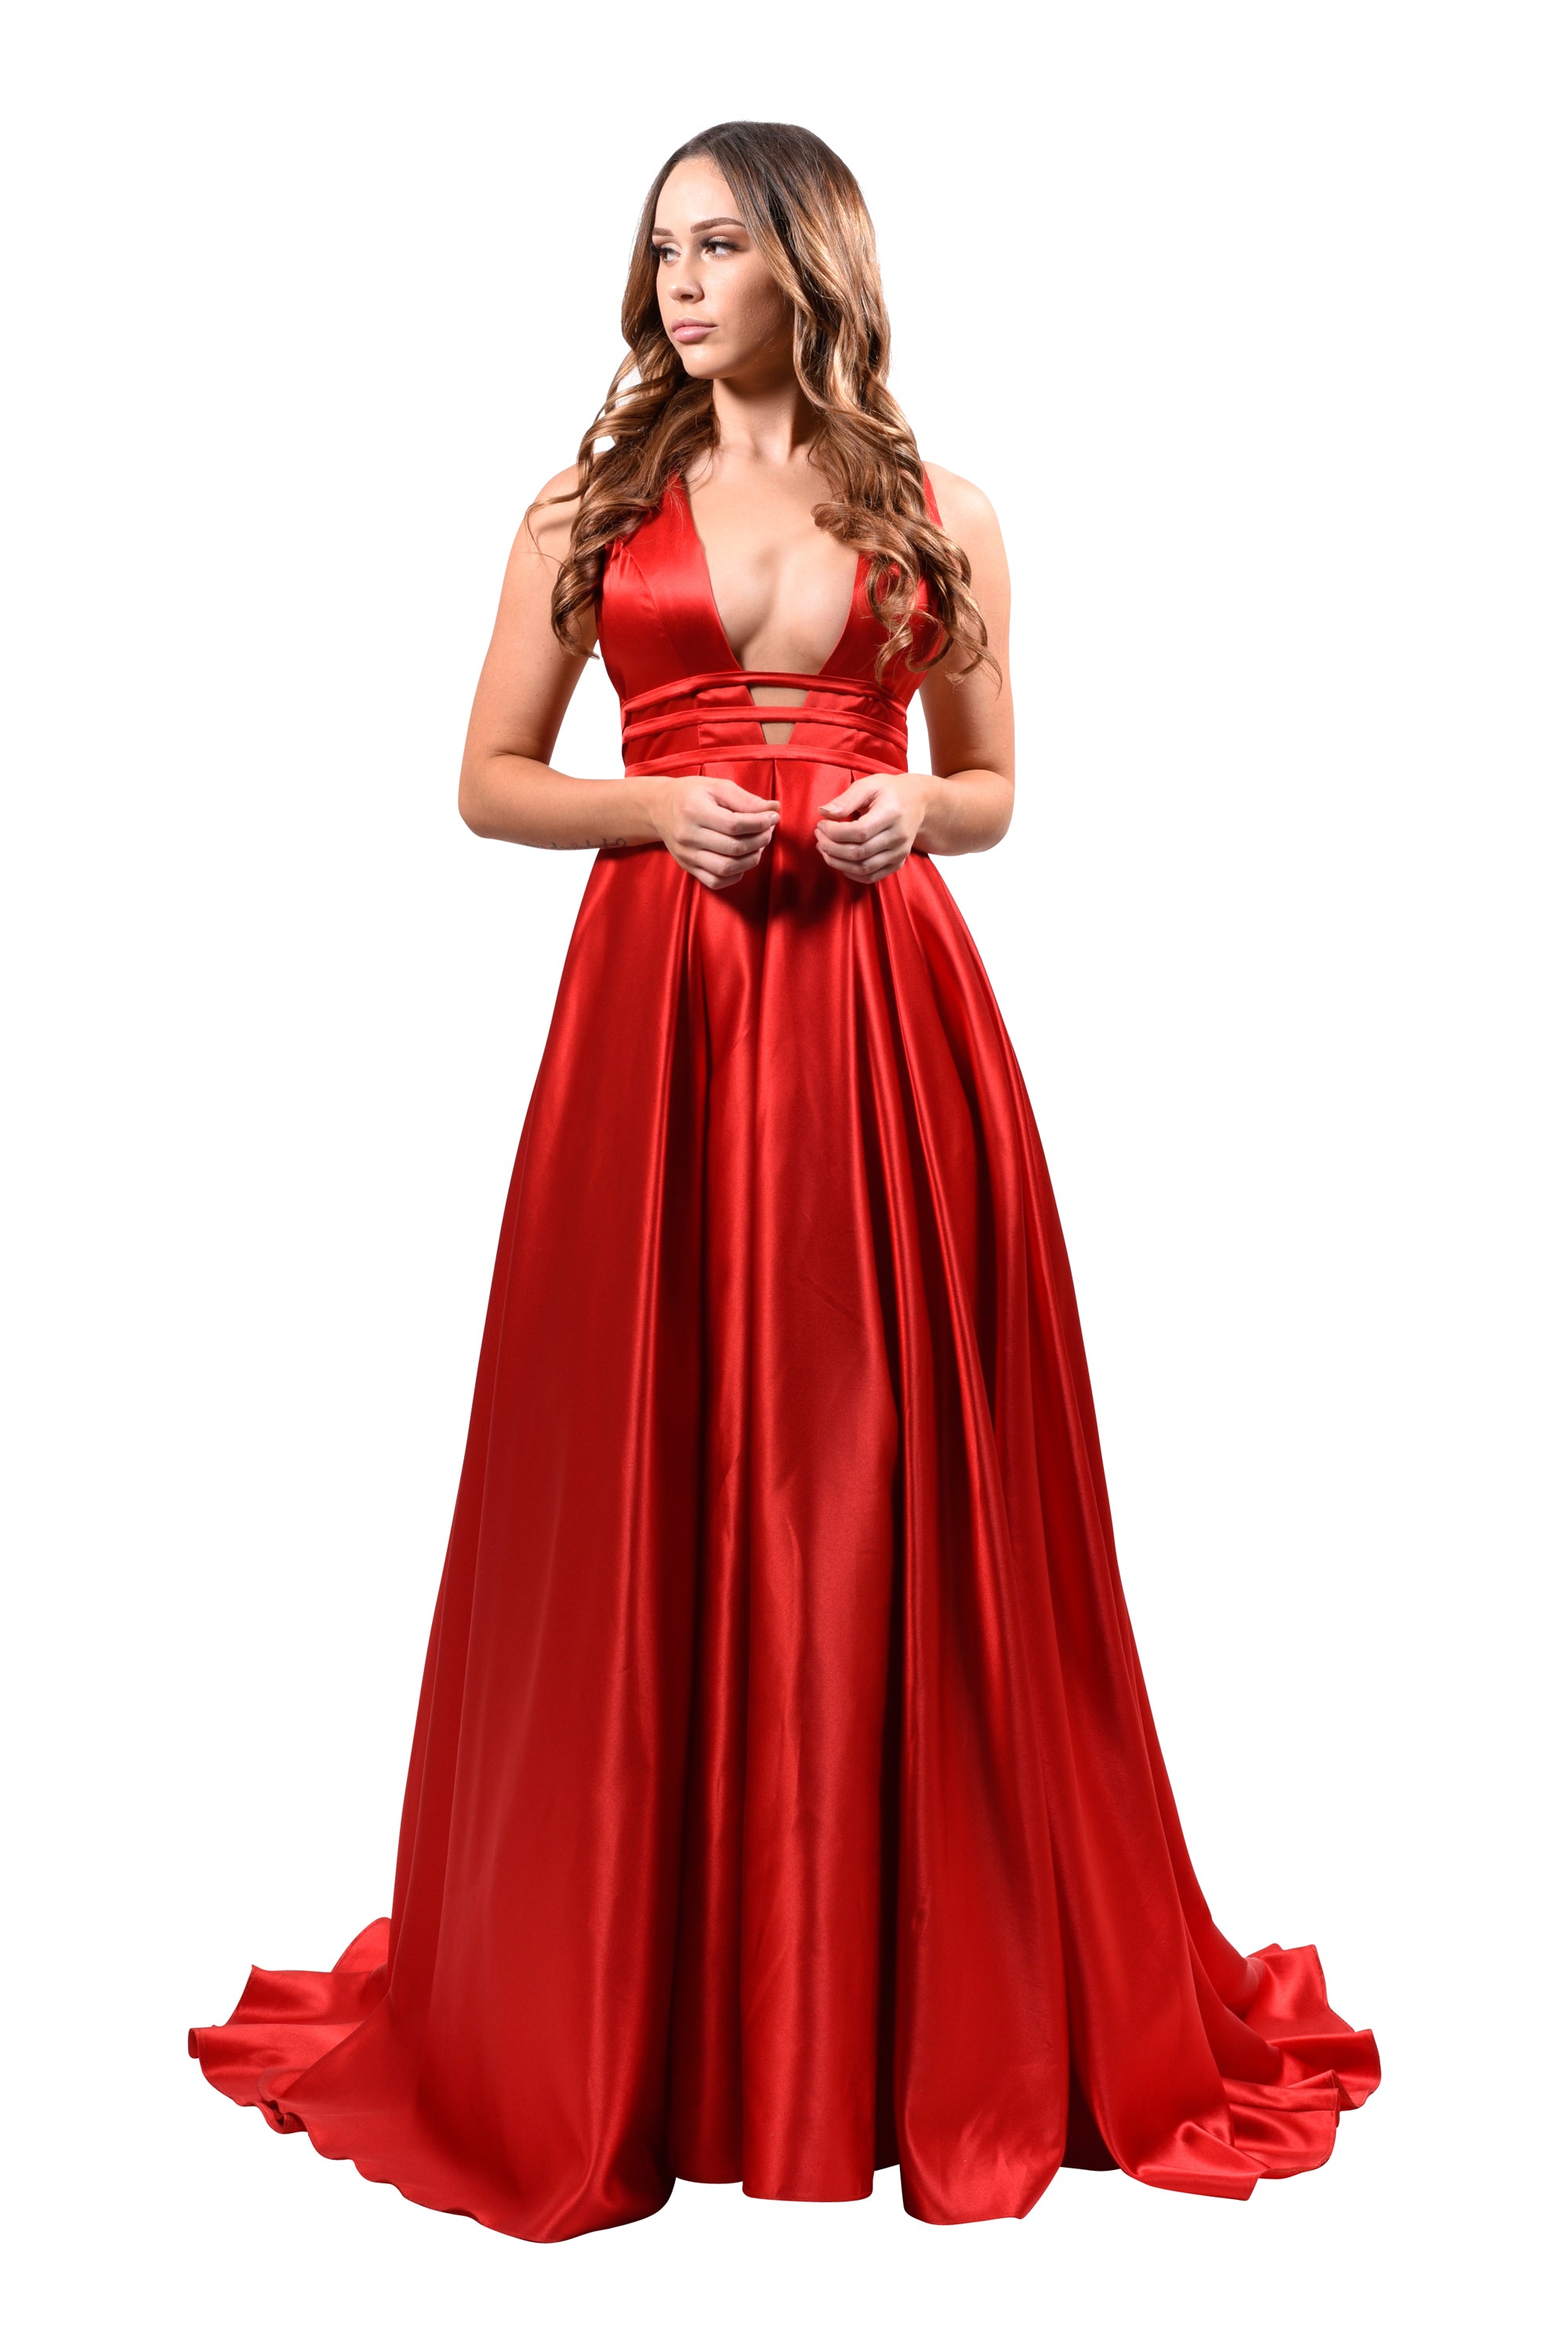 Honey Couture PIPPA Red V Front Formal Ball Gown Private Label$ AfterPay Humm ZipPay LayBuy Sezzle